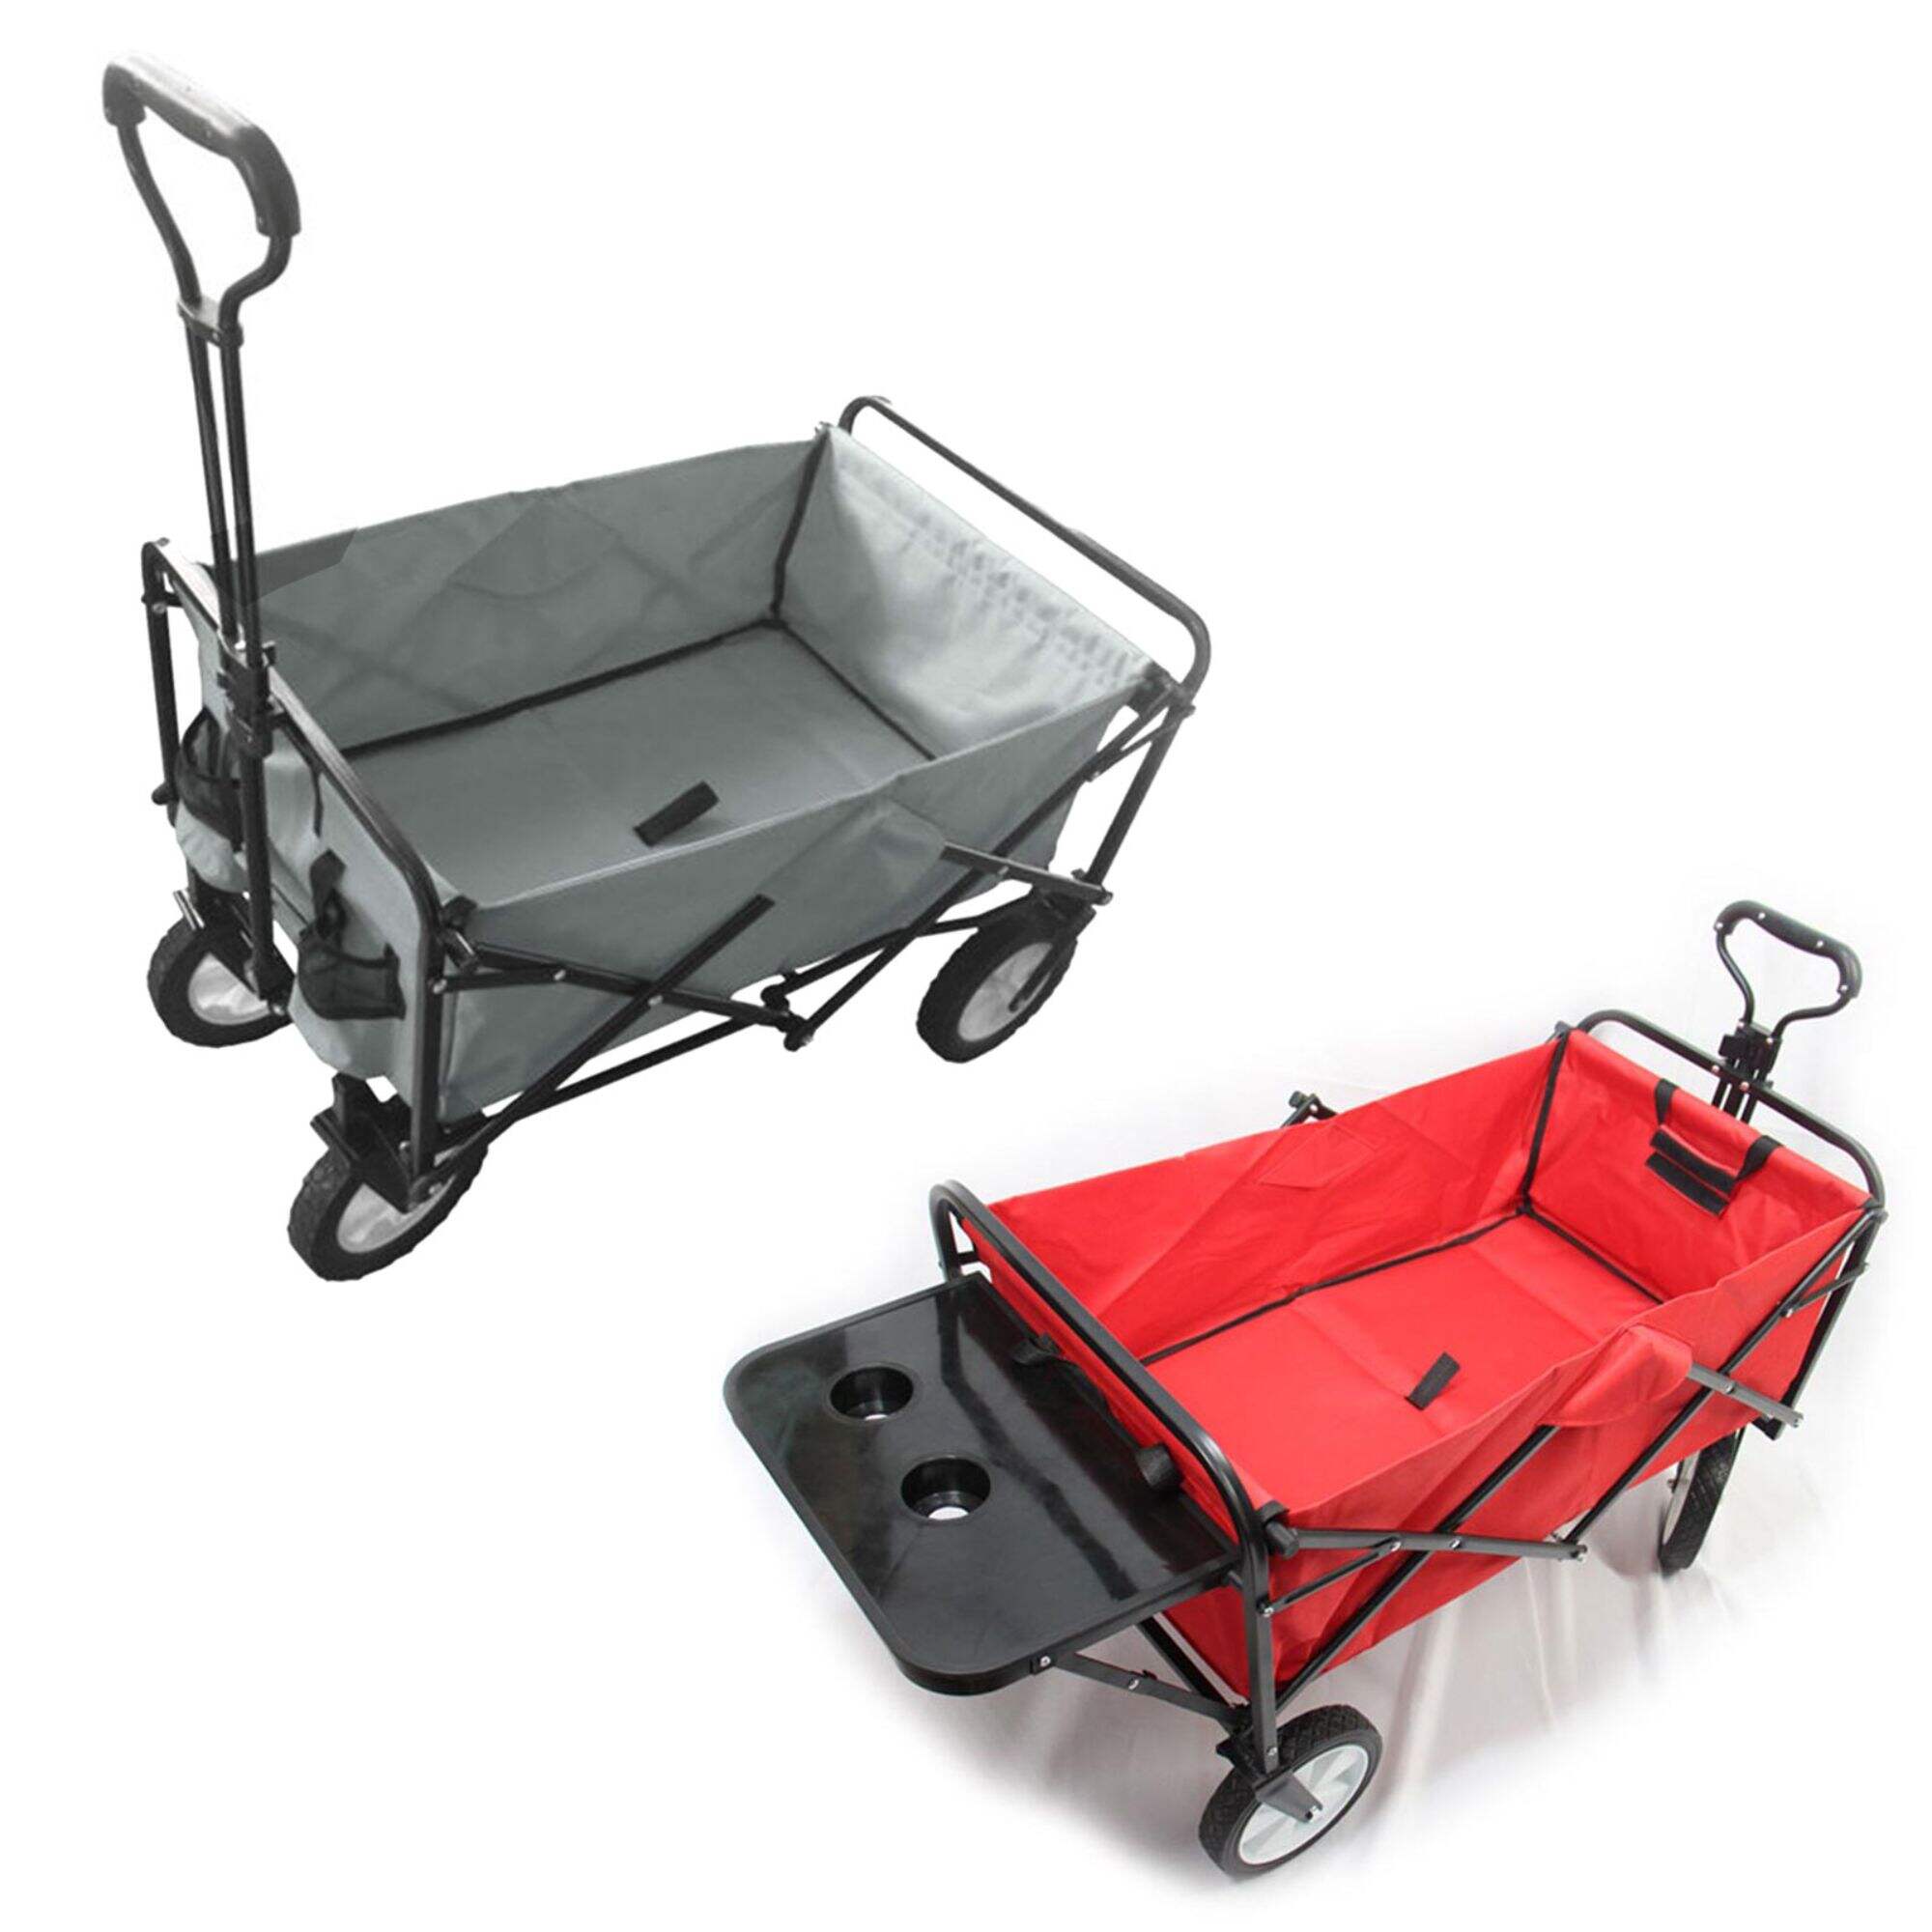 GT1802 Folding Wagon, Camping Wagon Cart, Foldable Trolley, for Outdoor Garden Sports